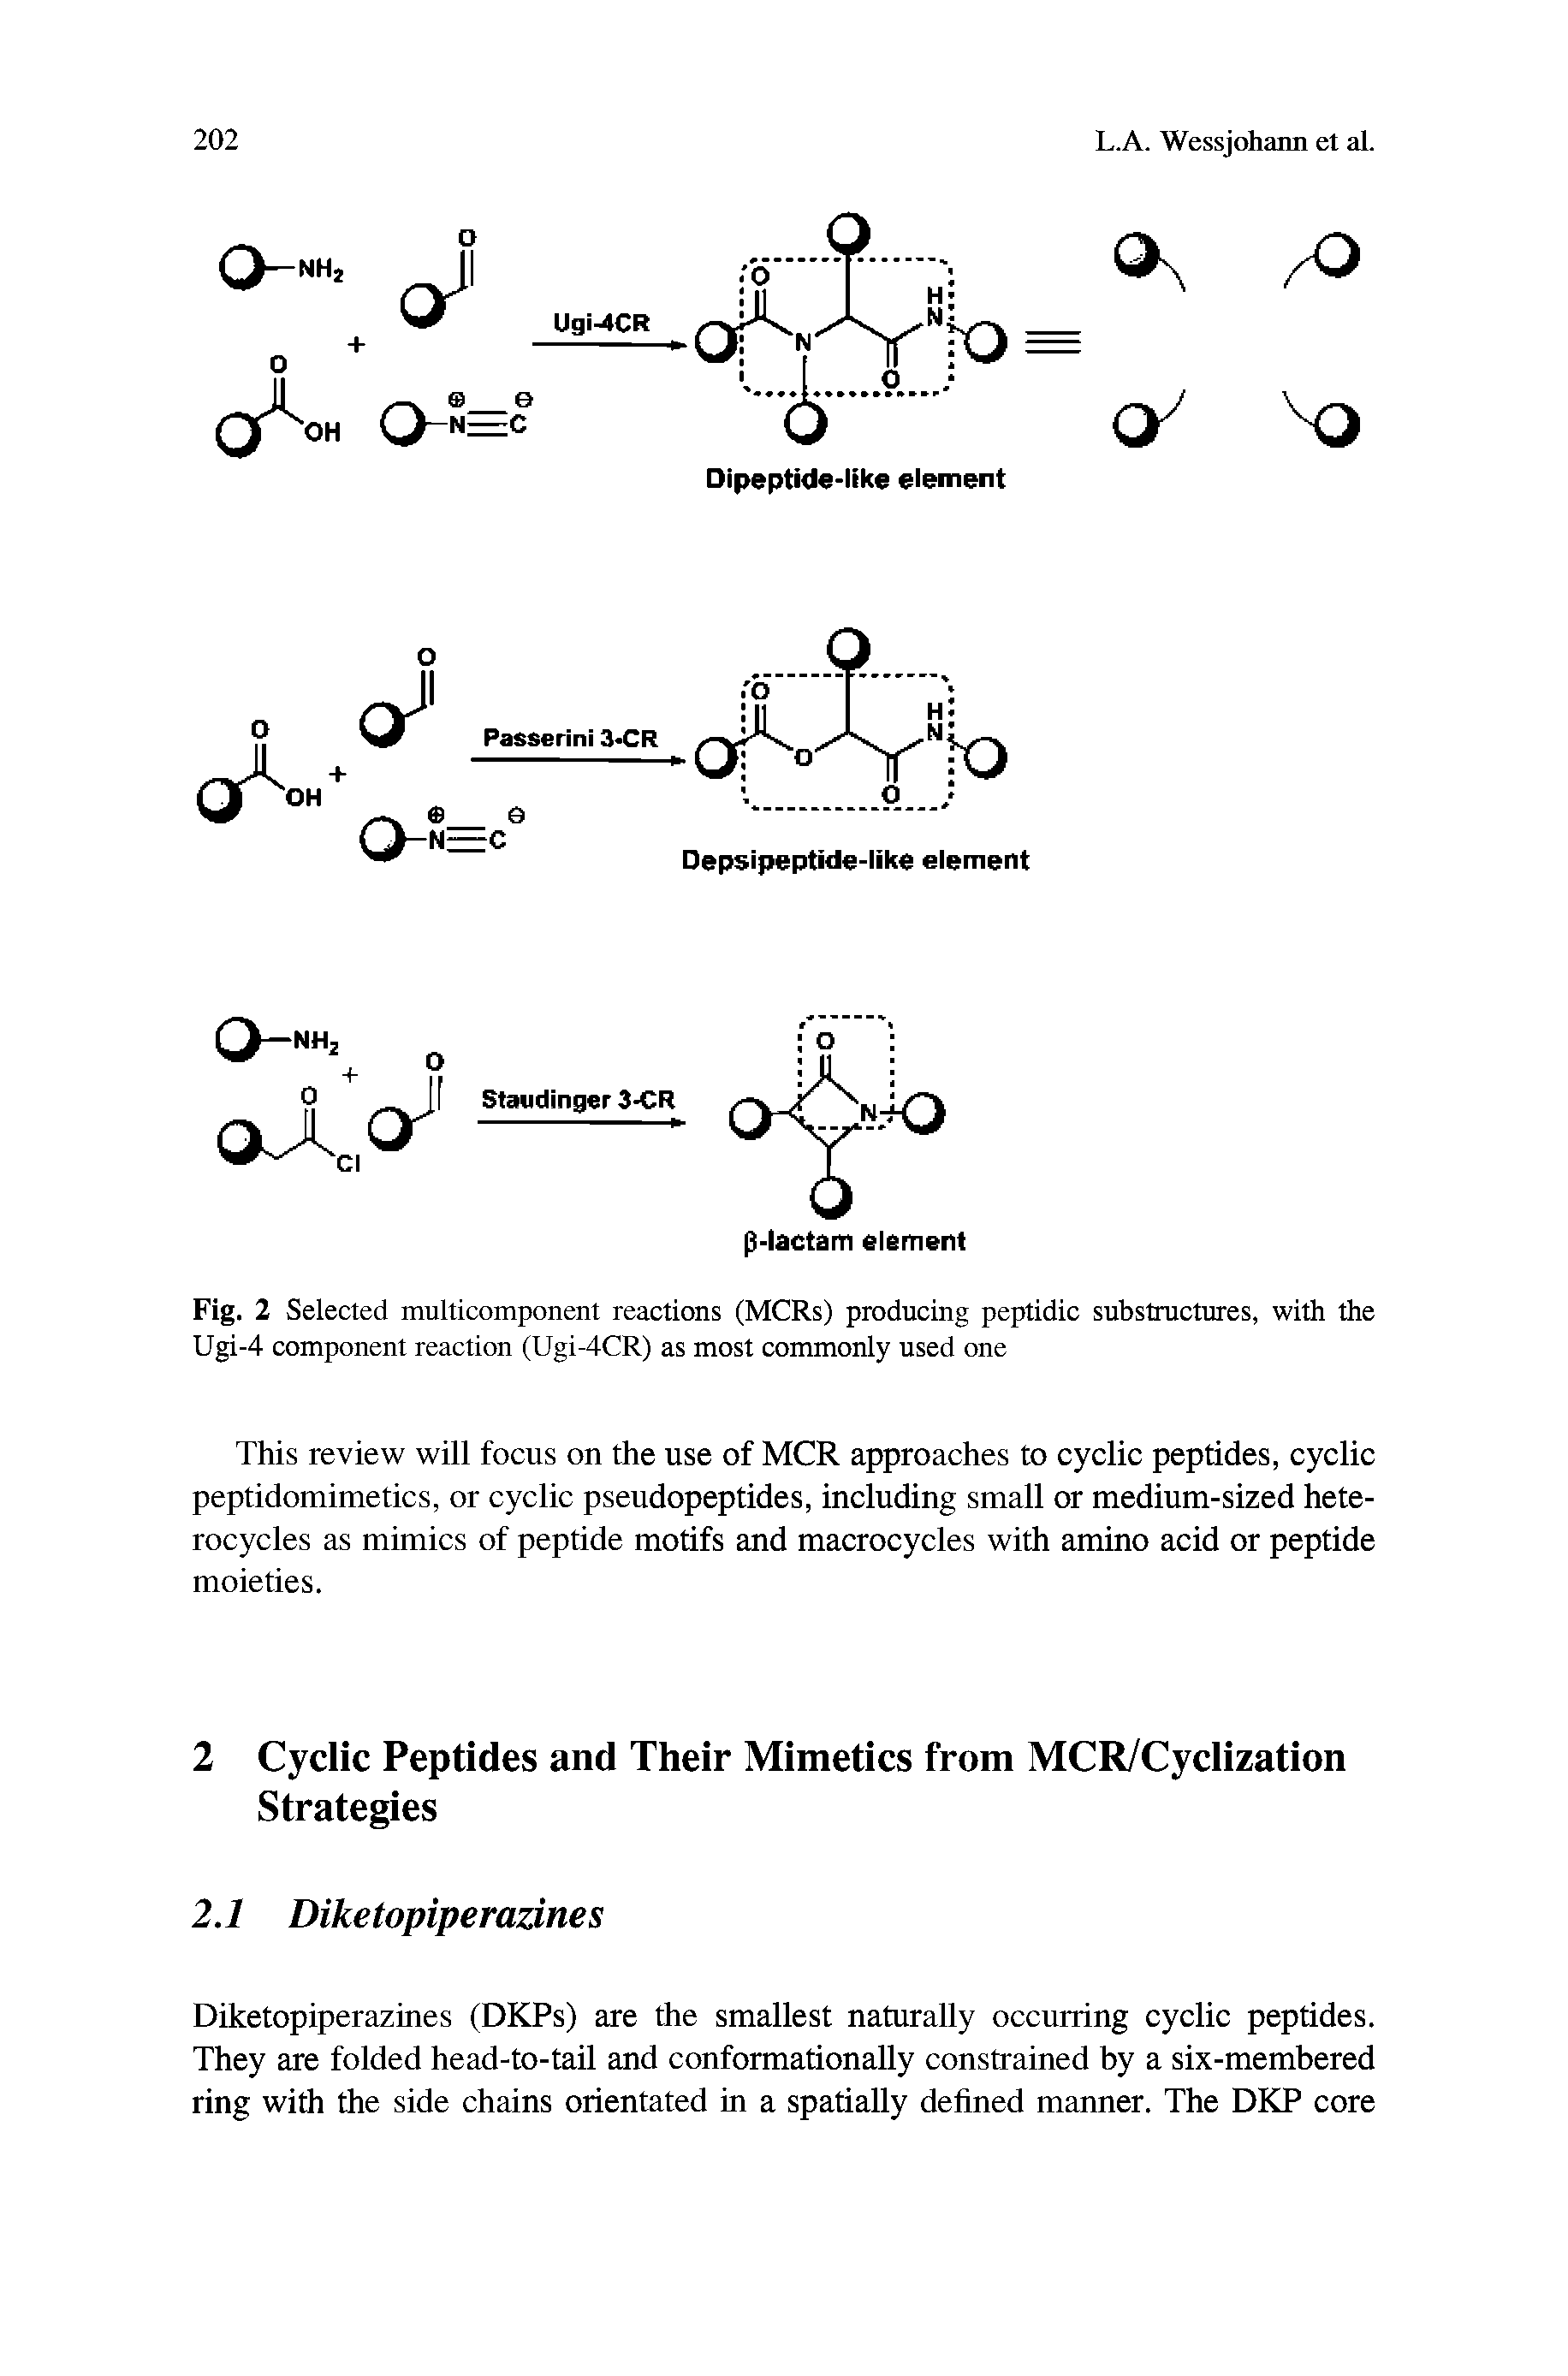 Fig. 2 Selected multicomponent reactions (MCRs) producing peptidic substructures, with the Ugi-4 component reaction (Ugi-4CR) as most commonly used one...